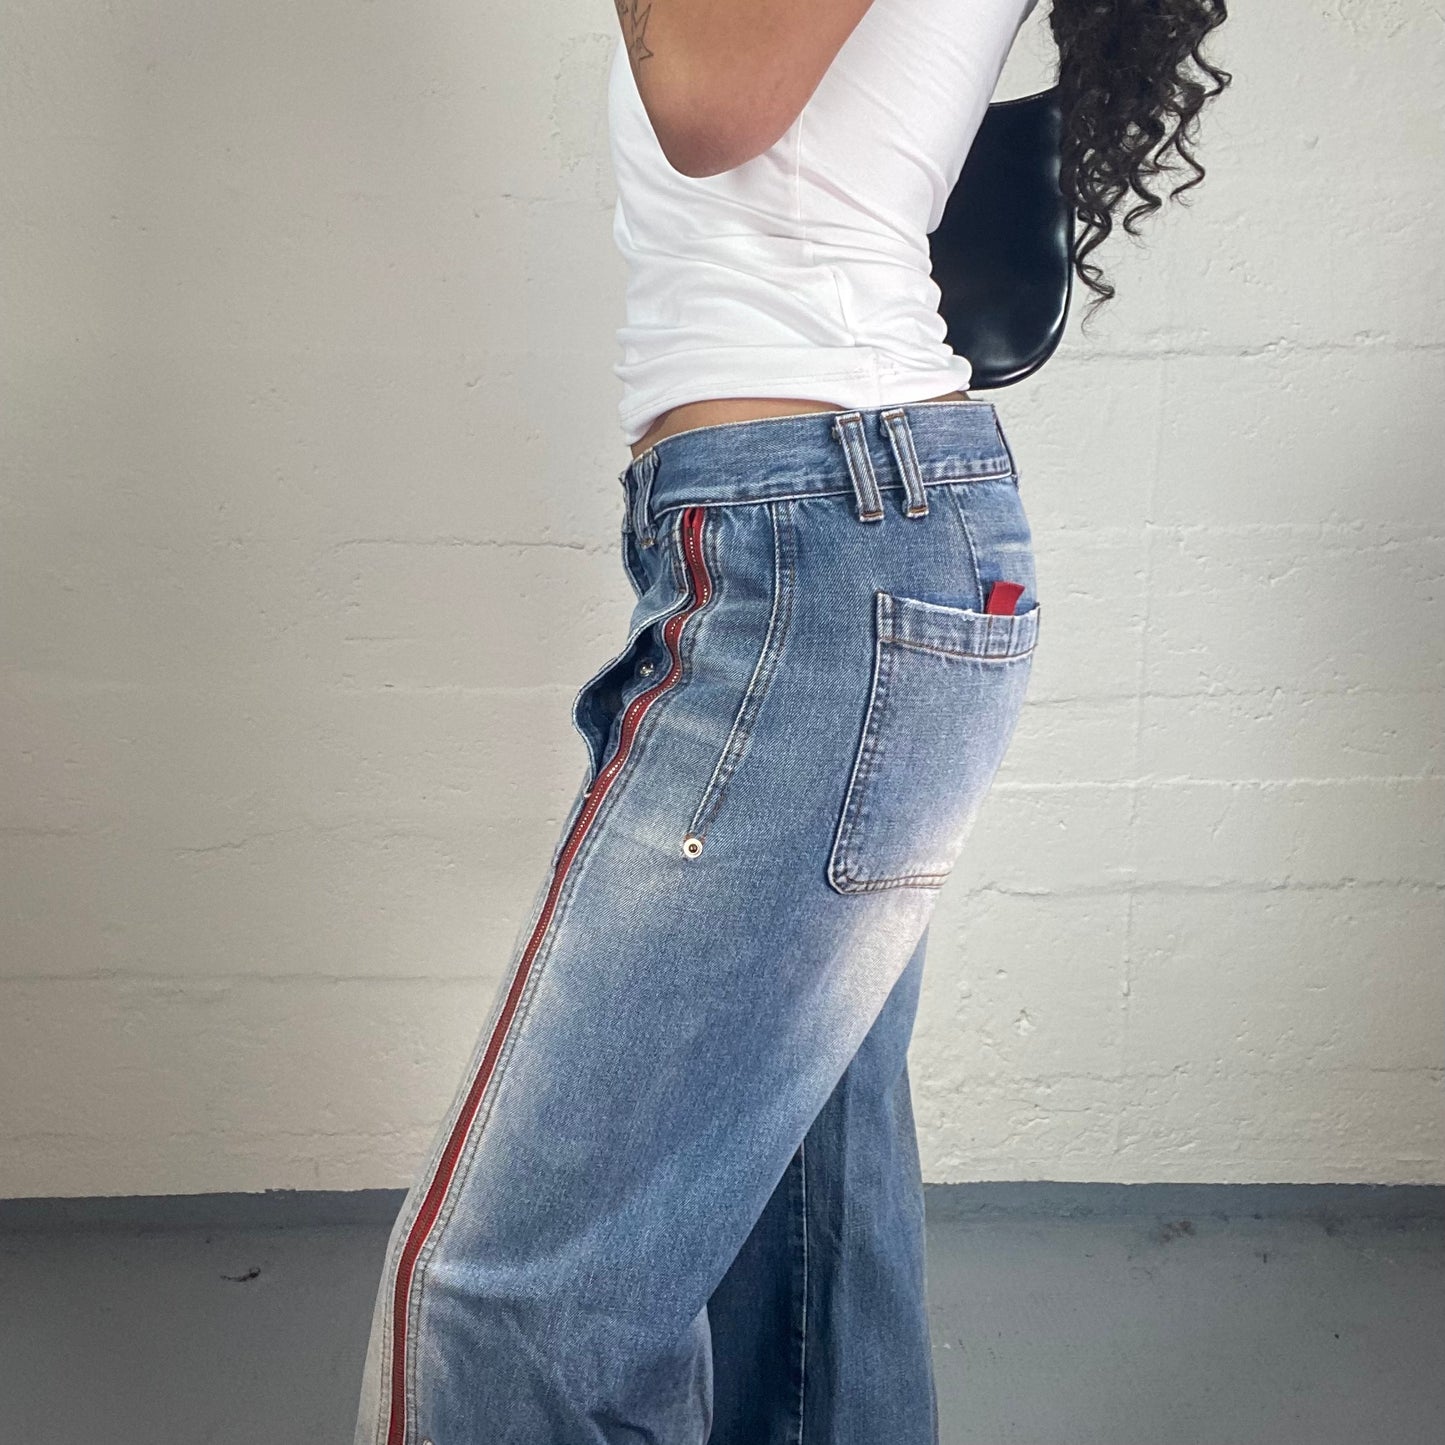 Vintage 2000's Skater Girl Light Blue Washed Off Denim Low Waisted Straight Cut Jeans with Red Zipper Details (M)